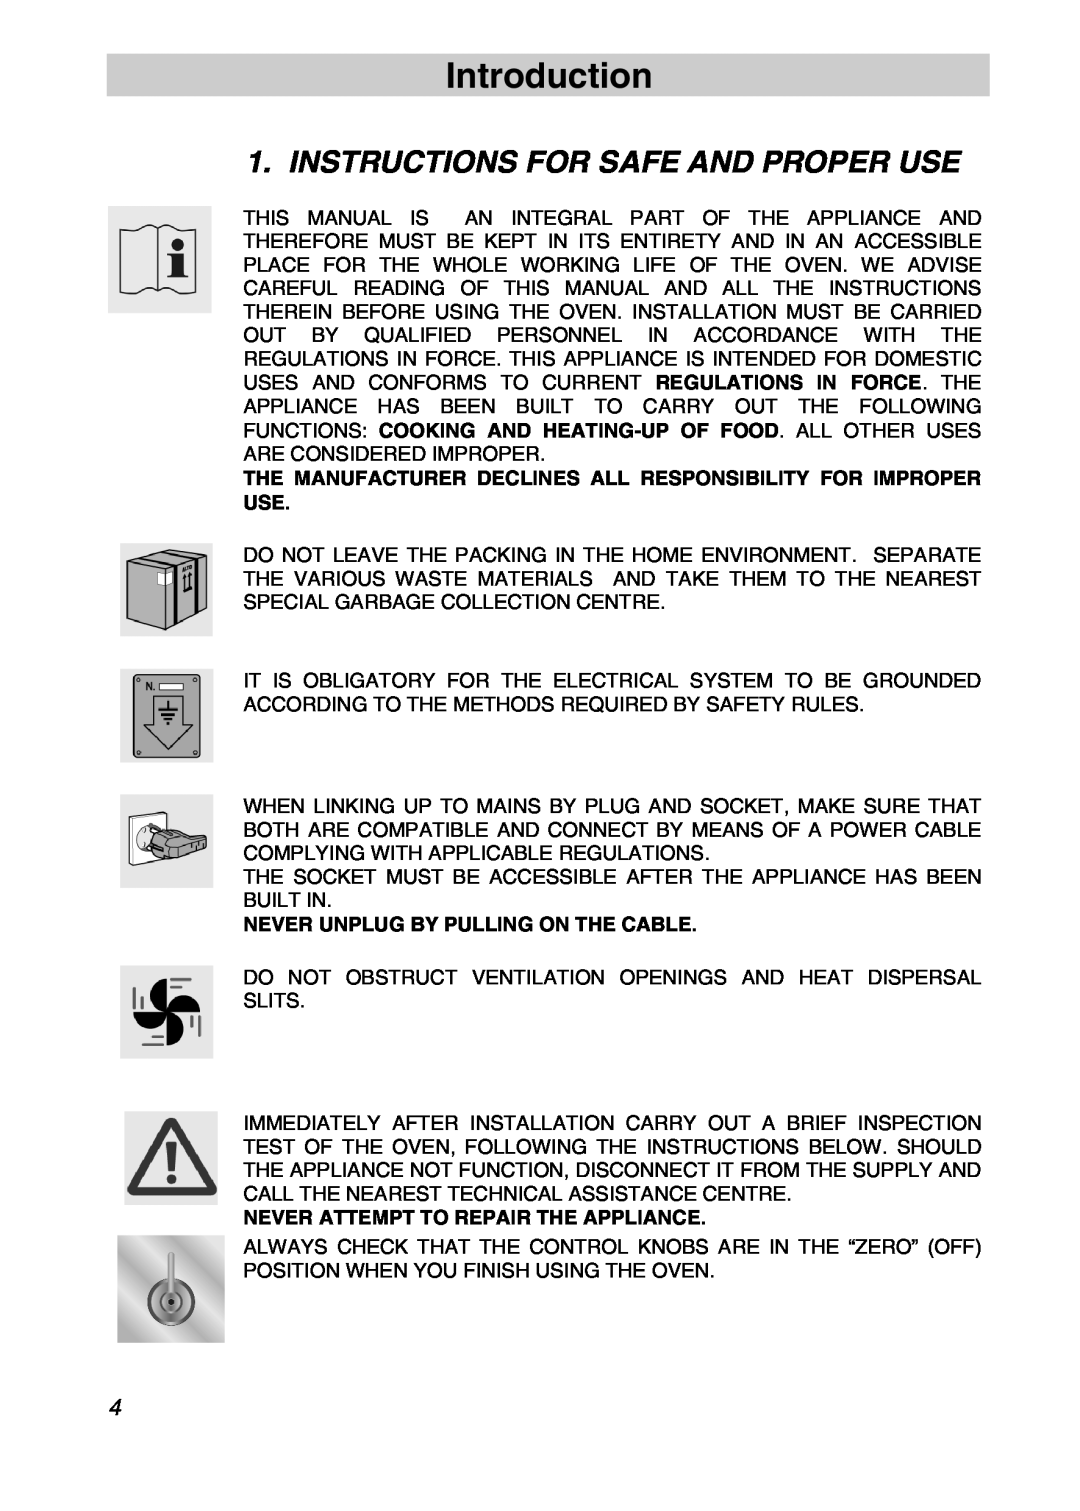 Smeg SA301X manual Introduction, Instructions For Safe And Proper Use, Never Unplug By Pulling On The Cable 